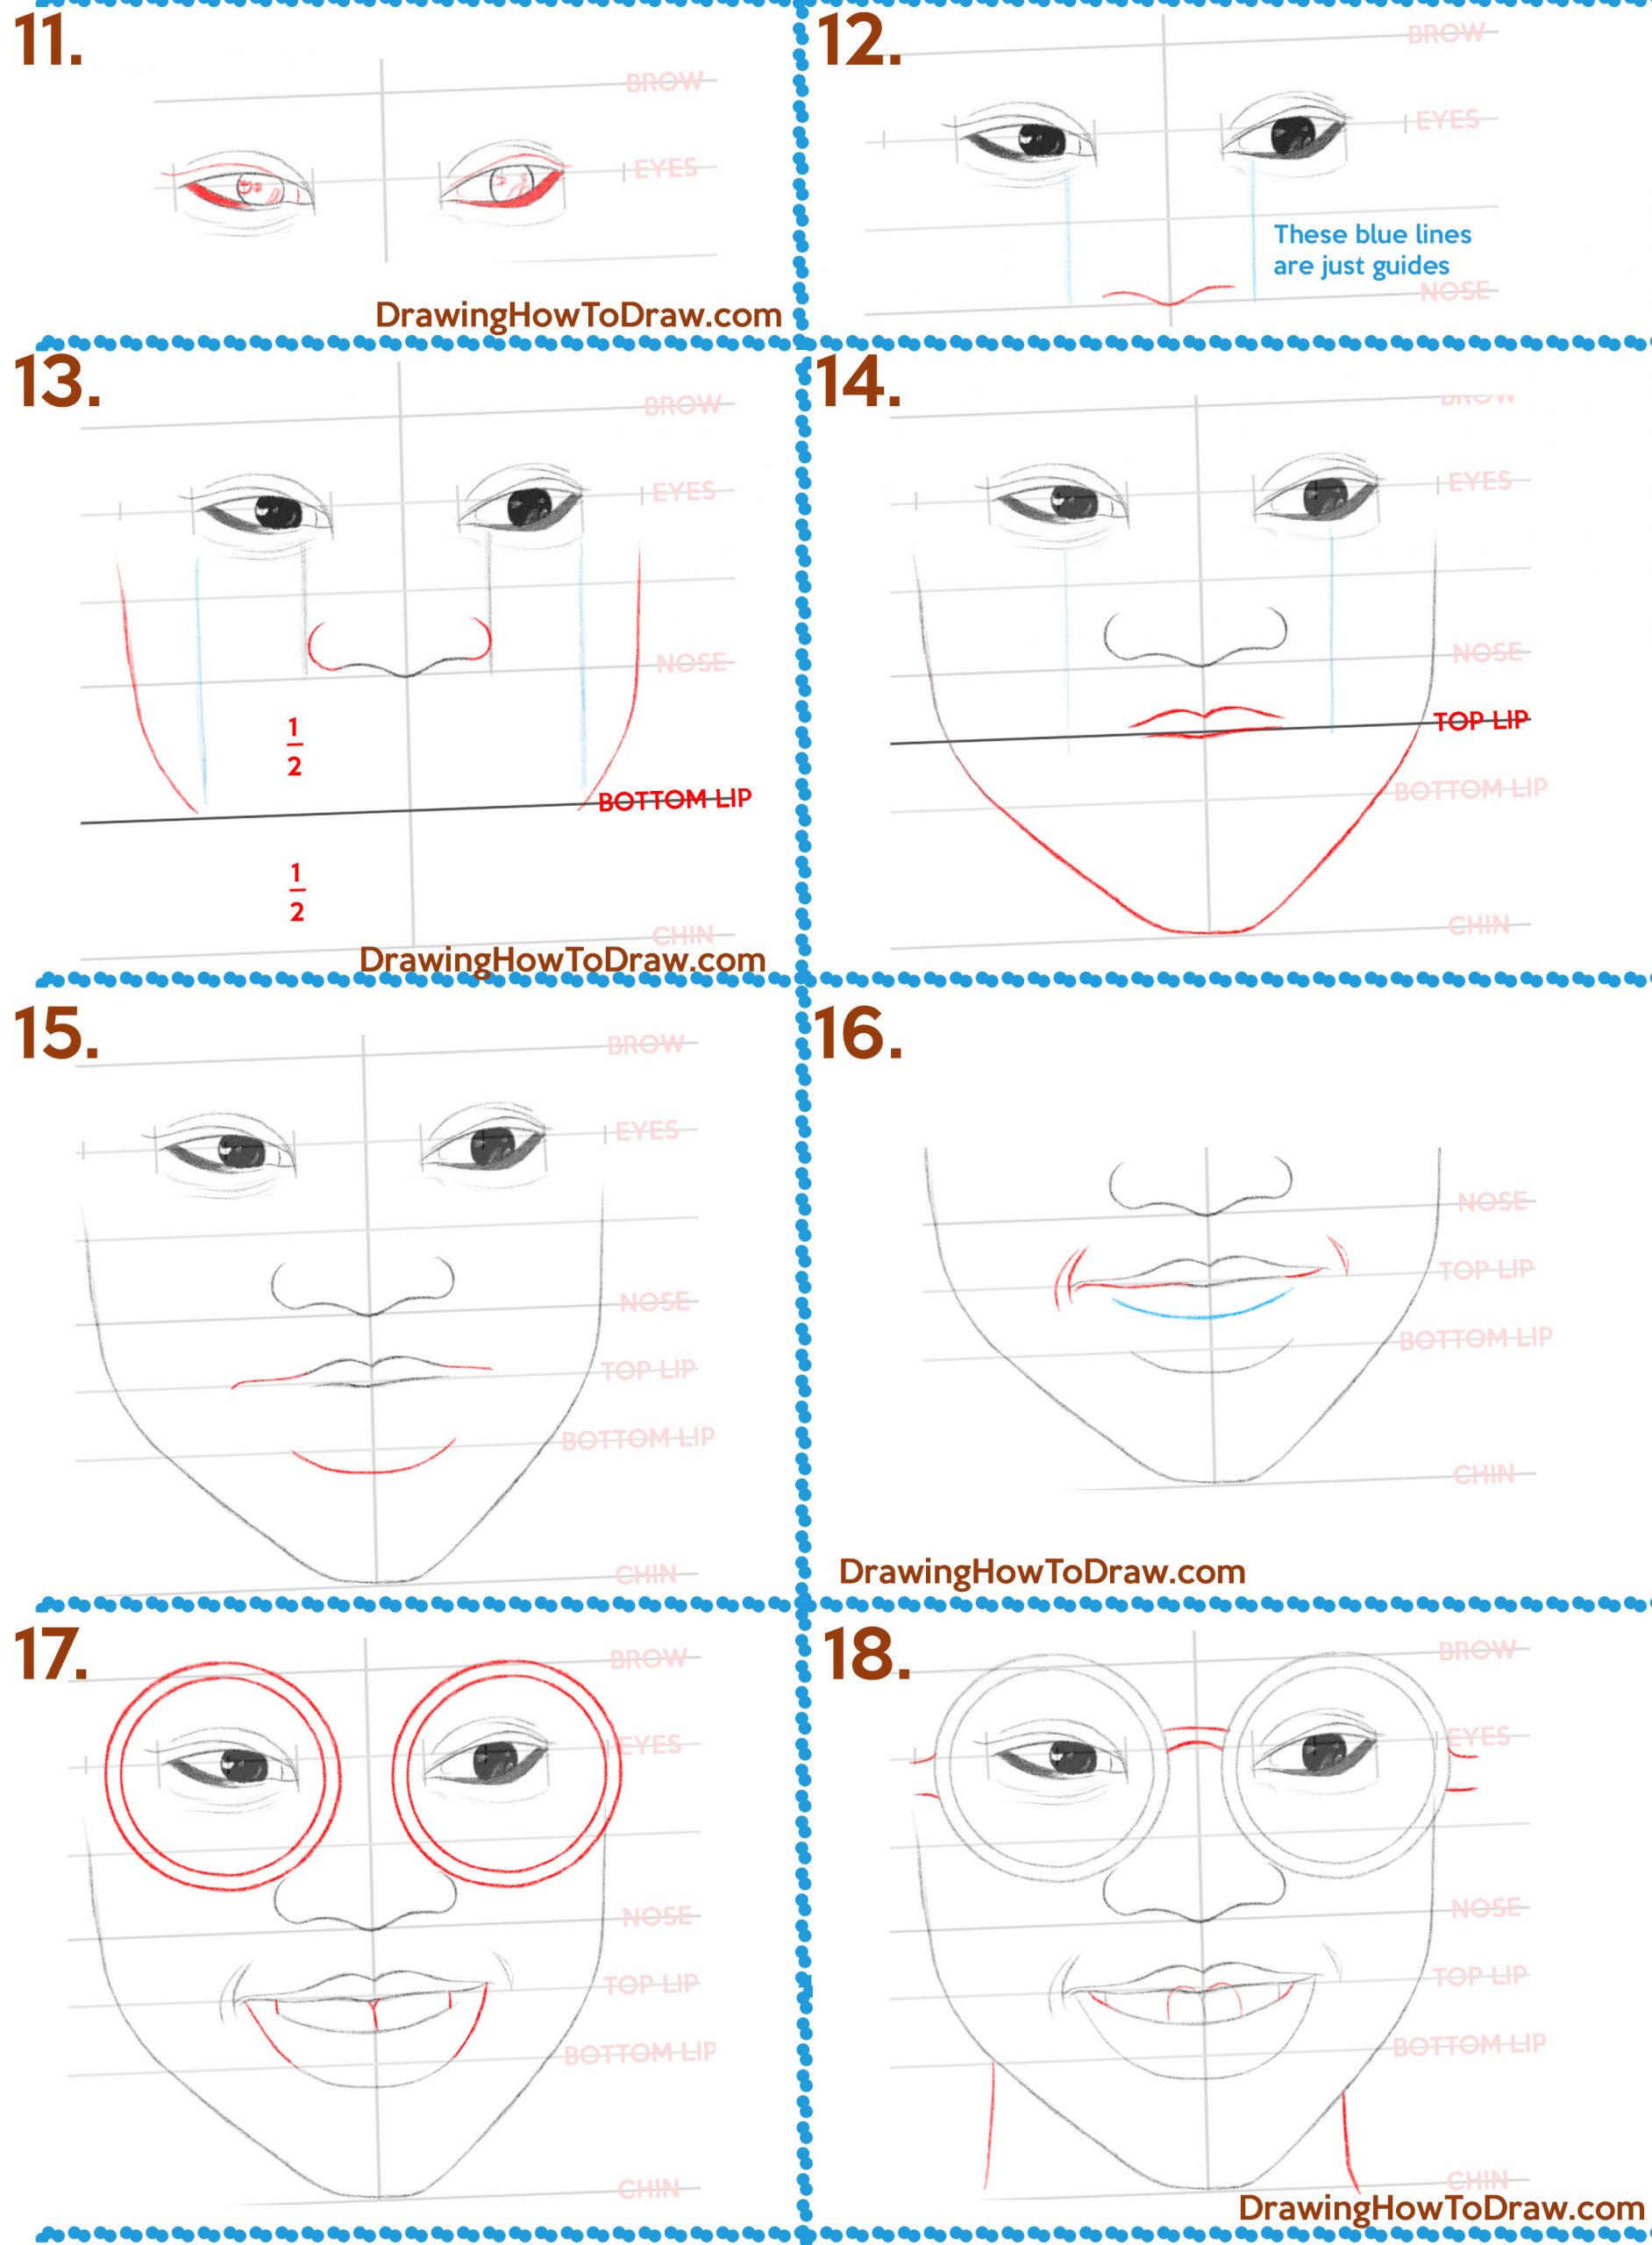 How to Draw a Black Girl's / Woman's Face with Glasses and an Afro Step